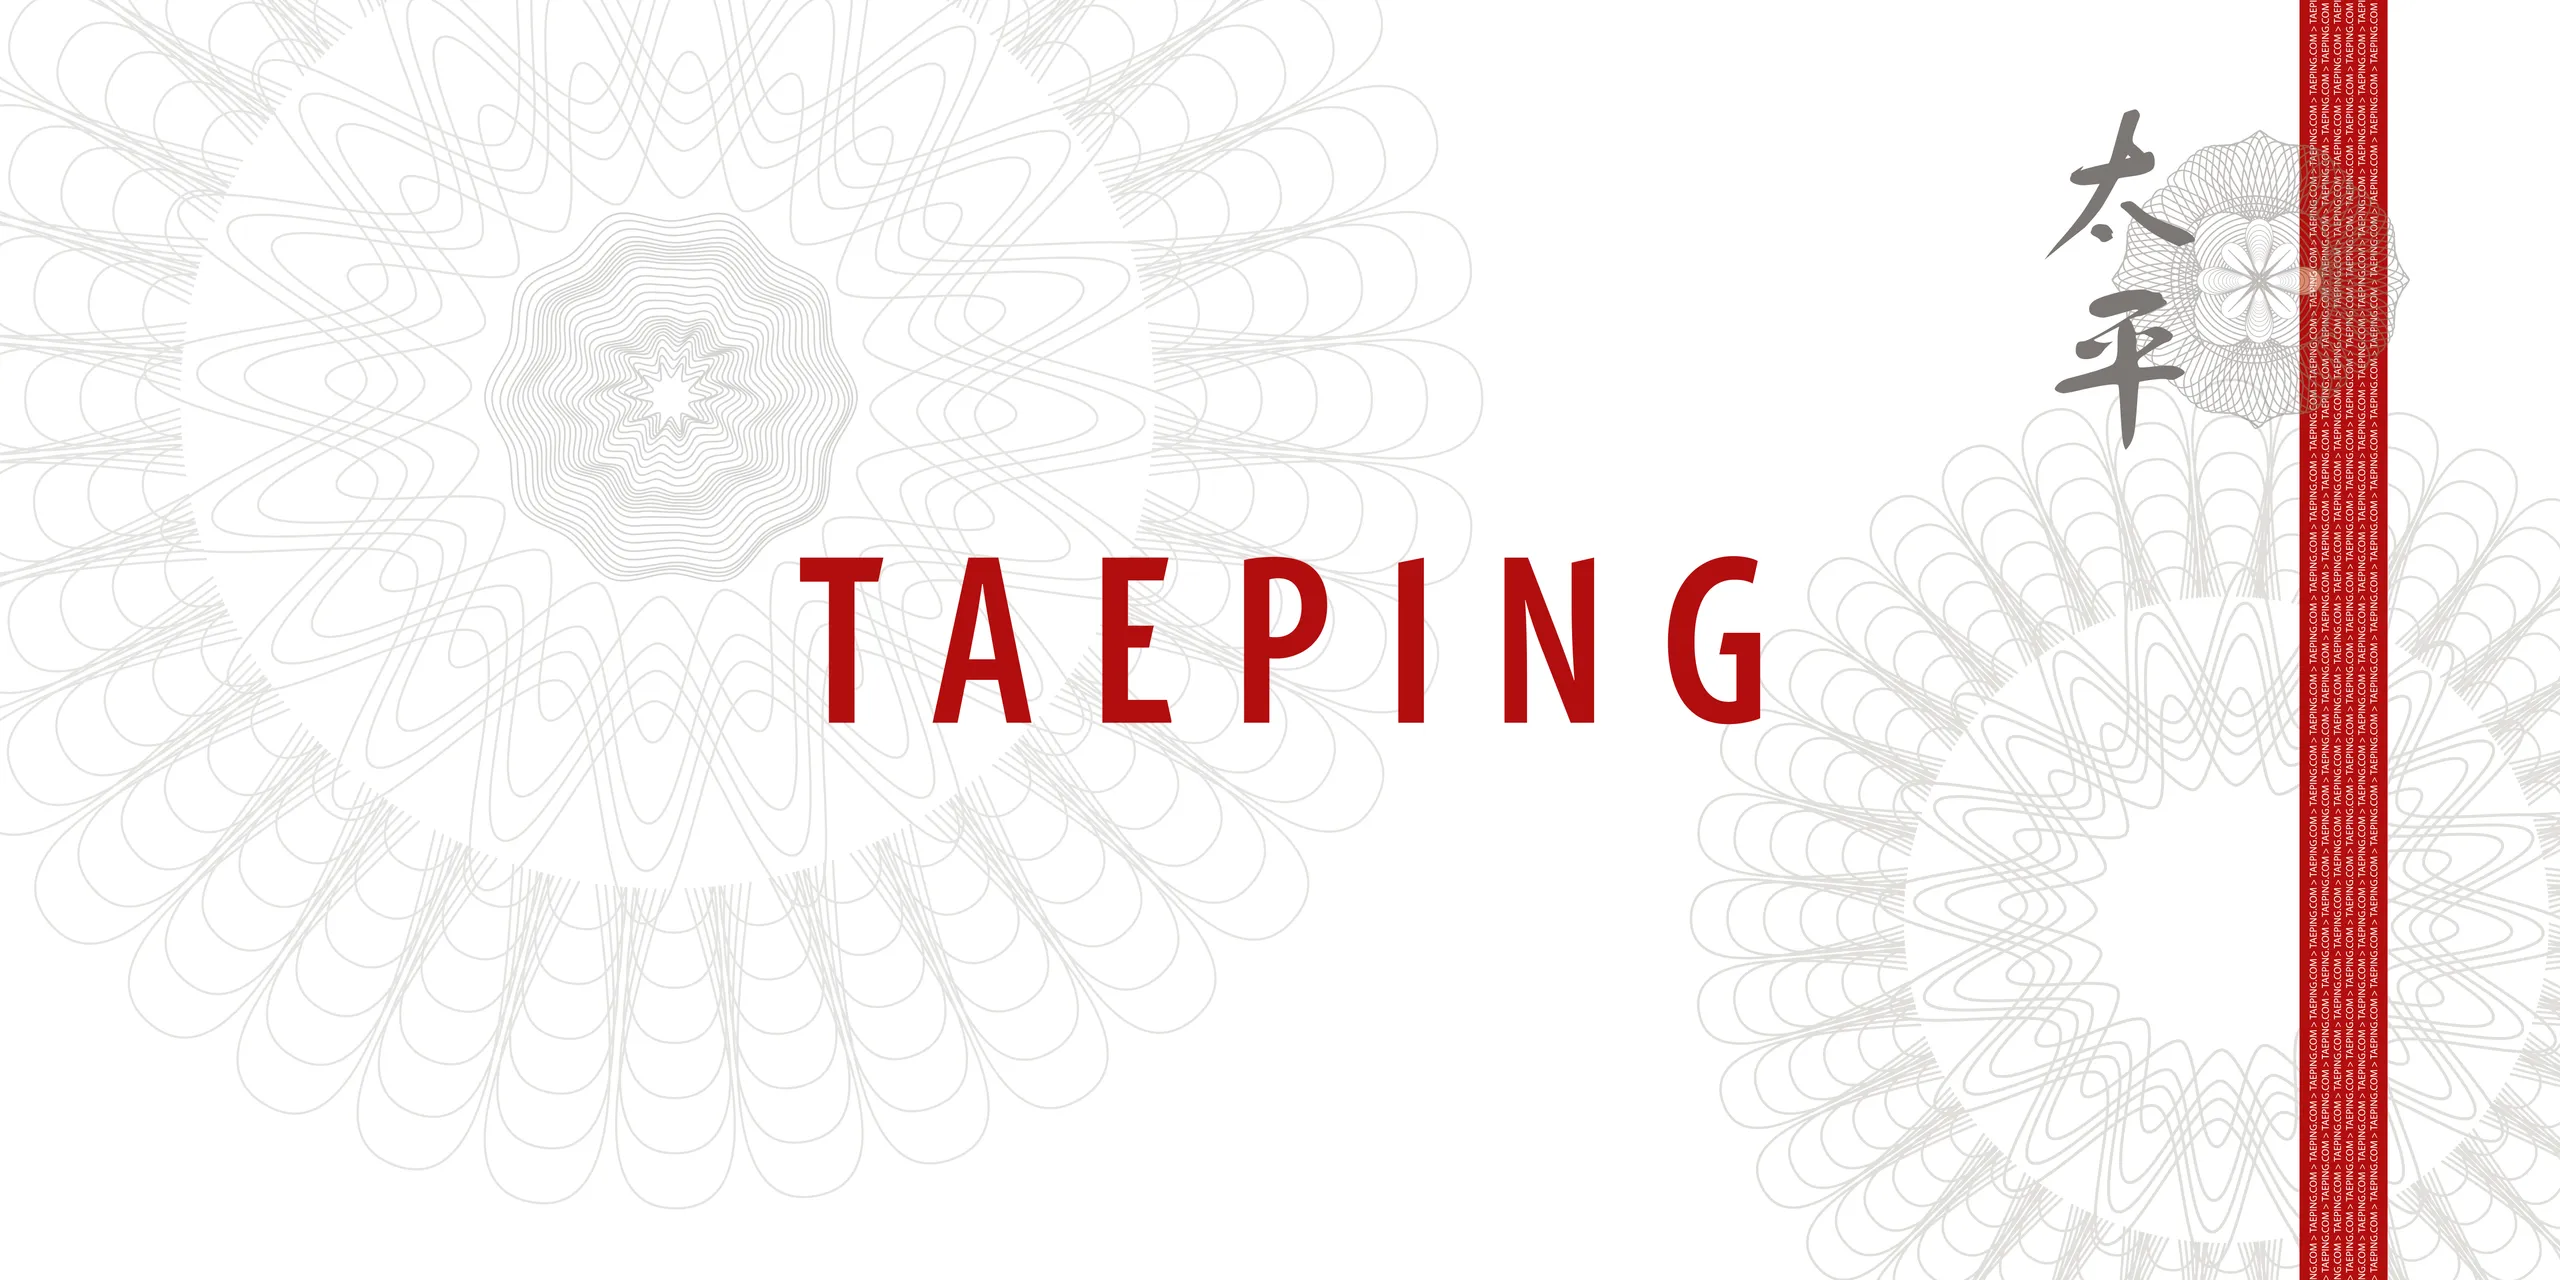 Taeping wordmark logo in red on a white background with giluoches and a vertical red band on the right